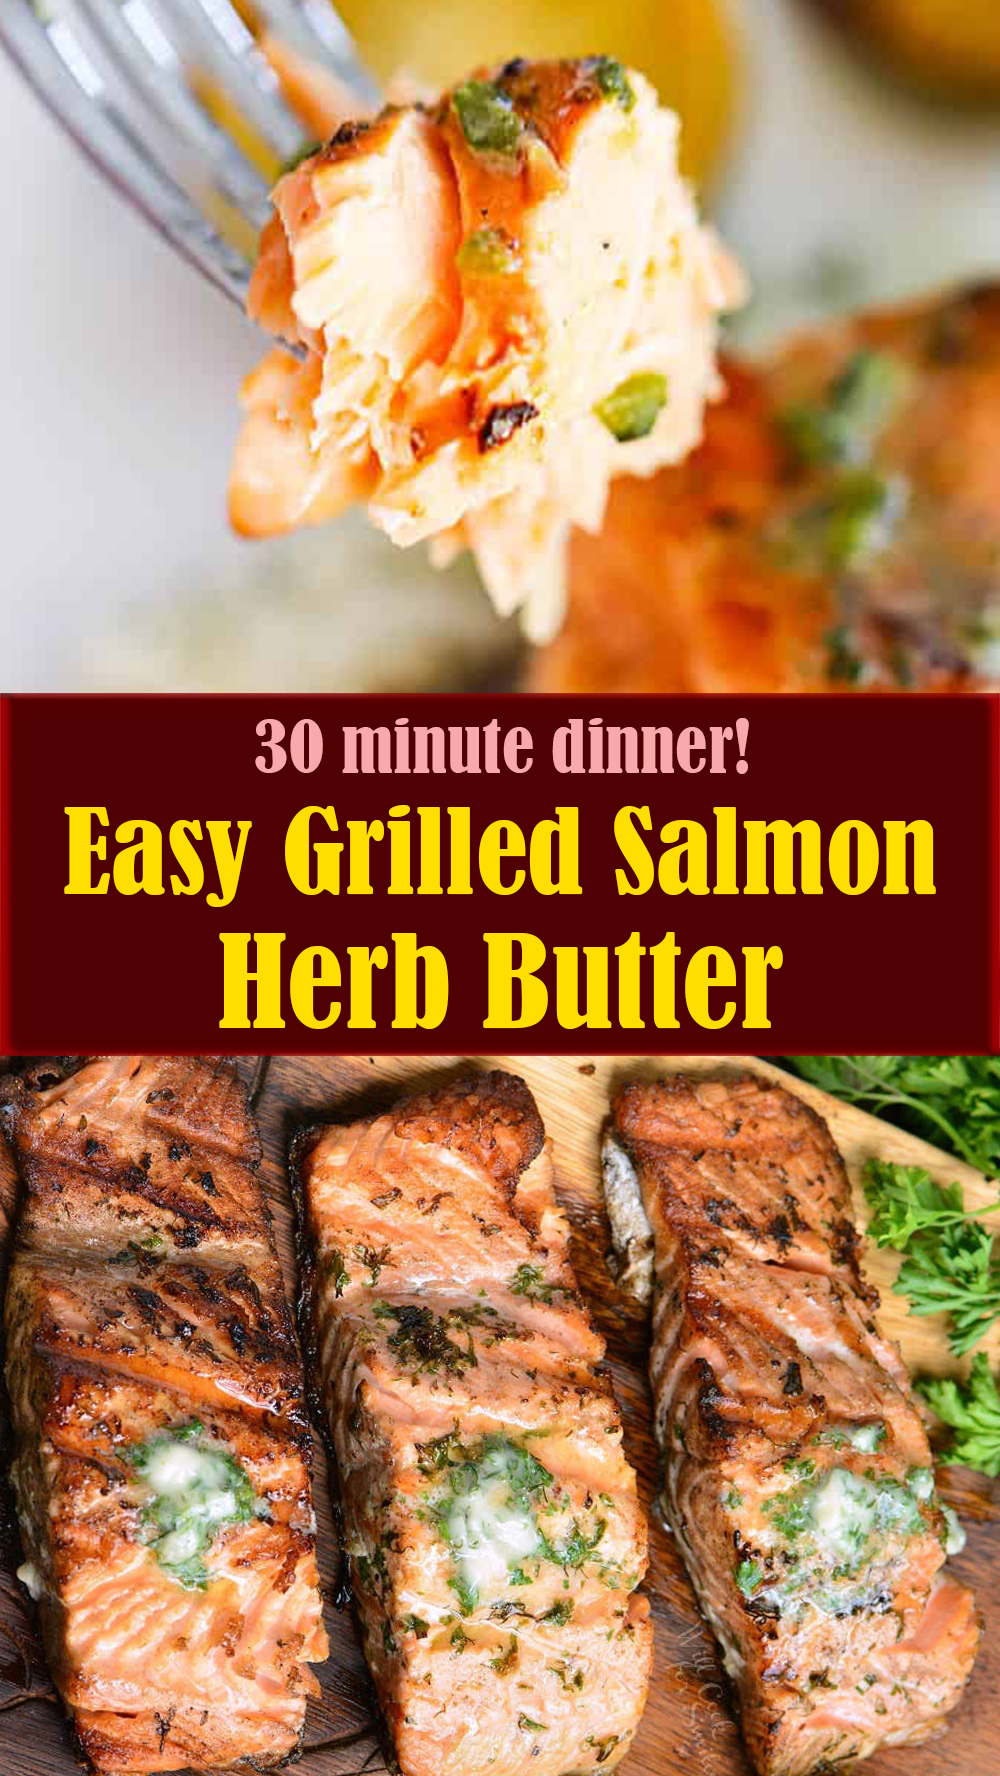 Easy Grilled Salmon with Herb Butter